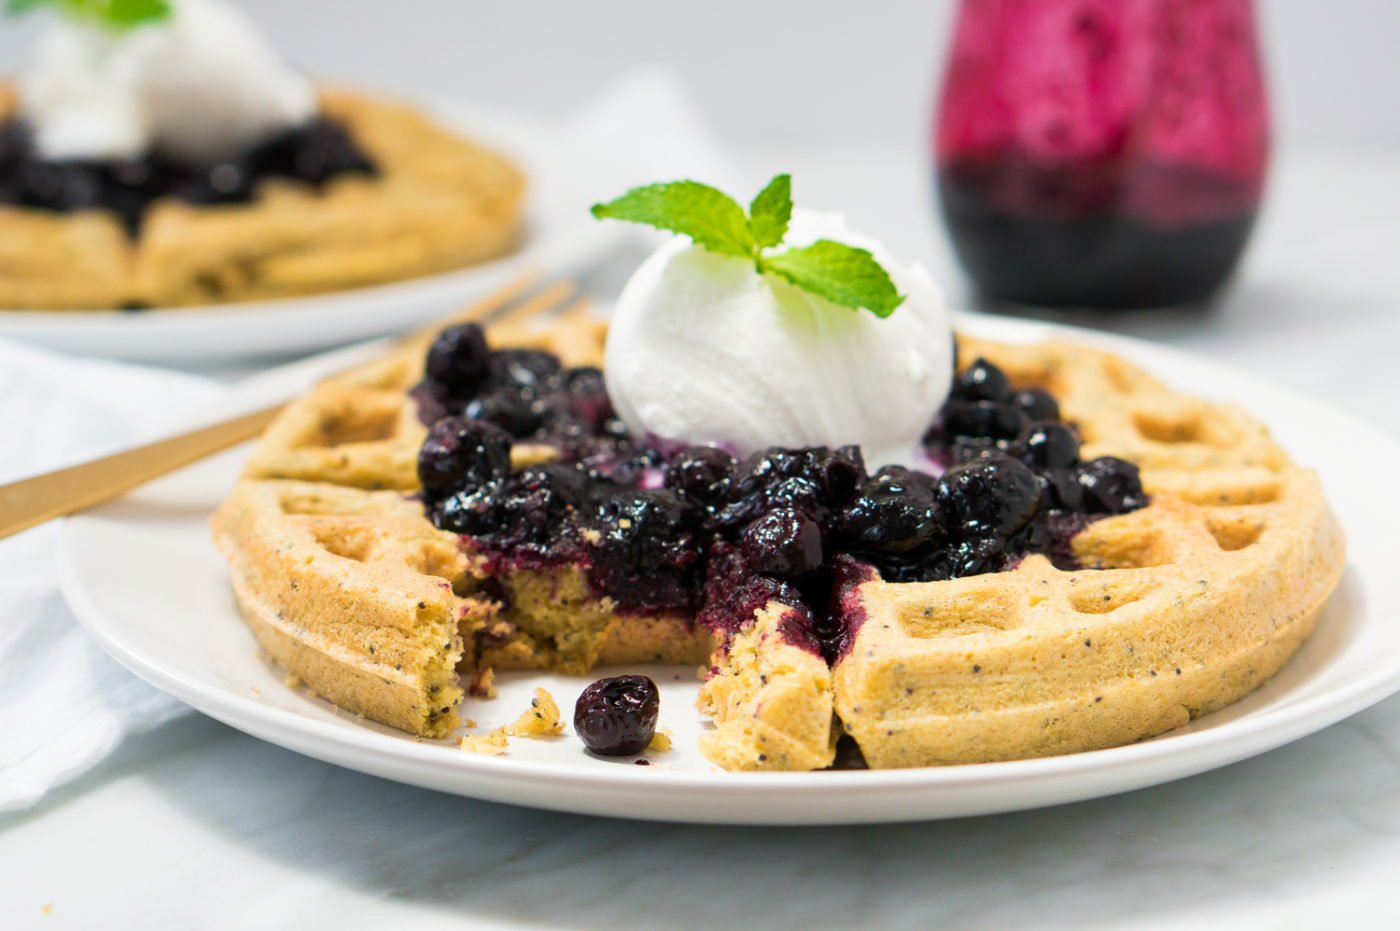 Lemon Poppyseed Waffles with Quick and Easy Blueberry Compote (Gluten Free, Dairy Free, Refined Sugar Free)